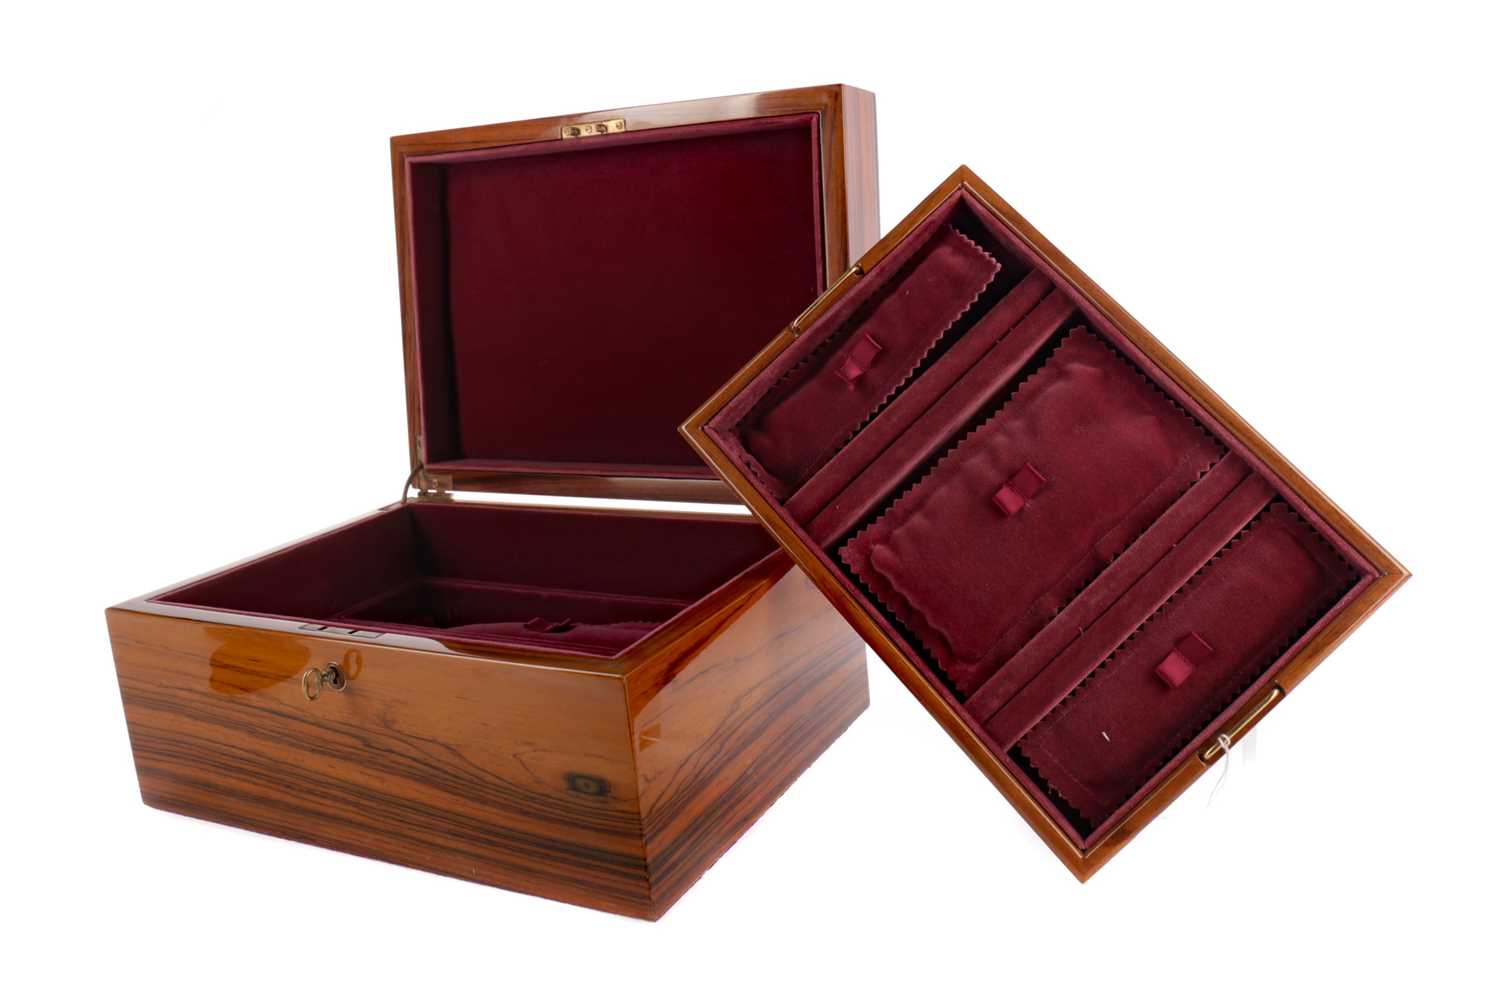 Lot 1415 - A 20TH CENTURY LACQUERED WOOD JEWELLERY CASKET